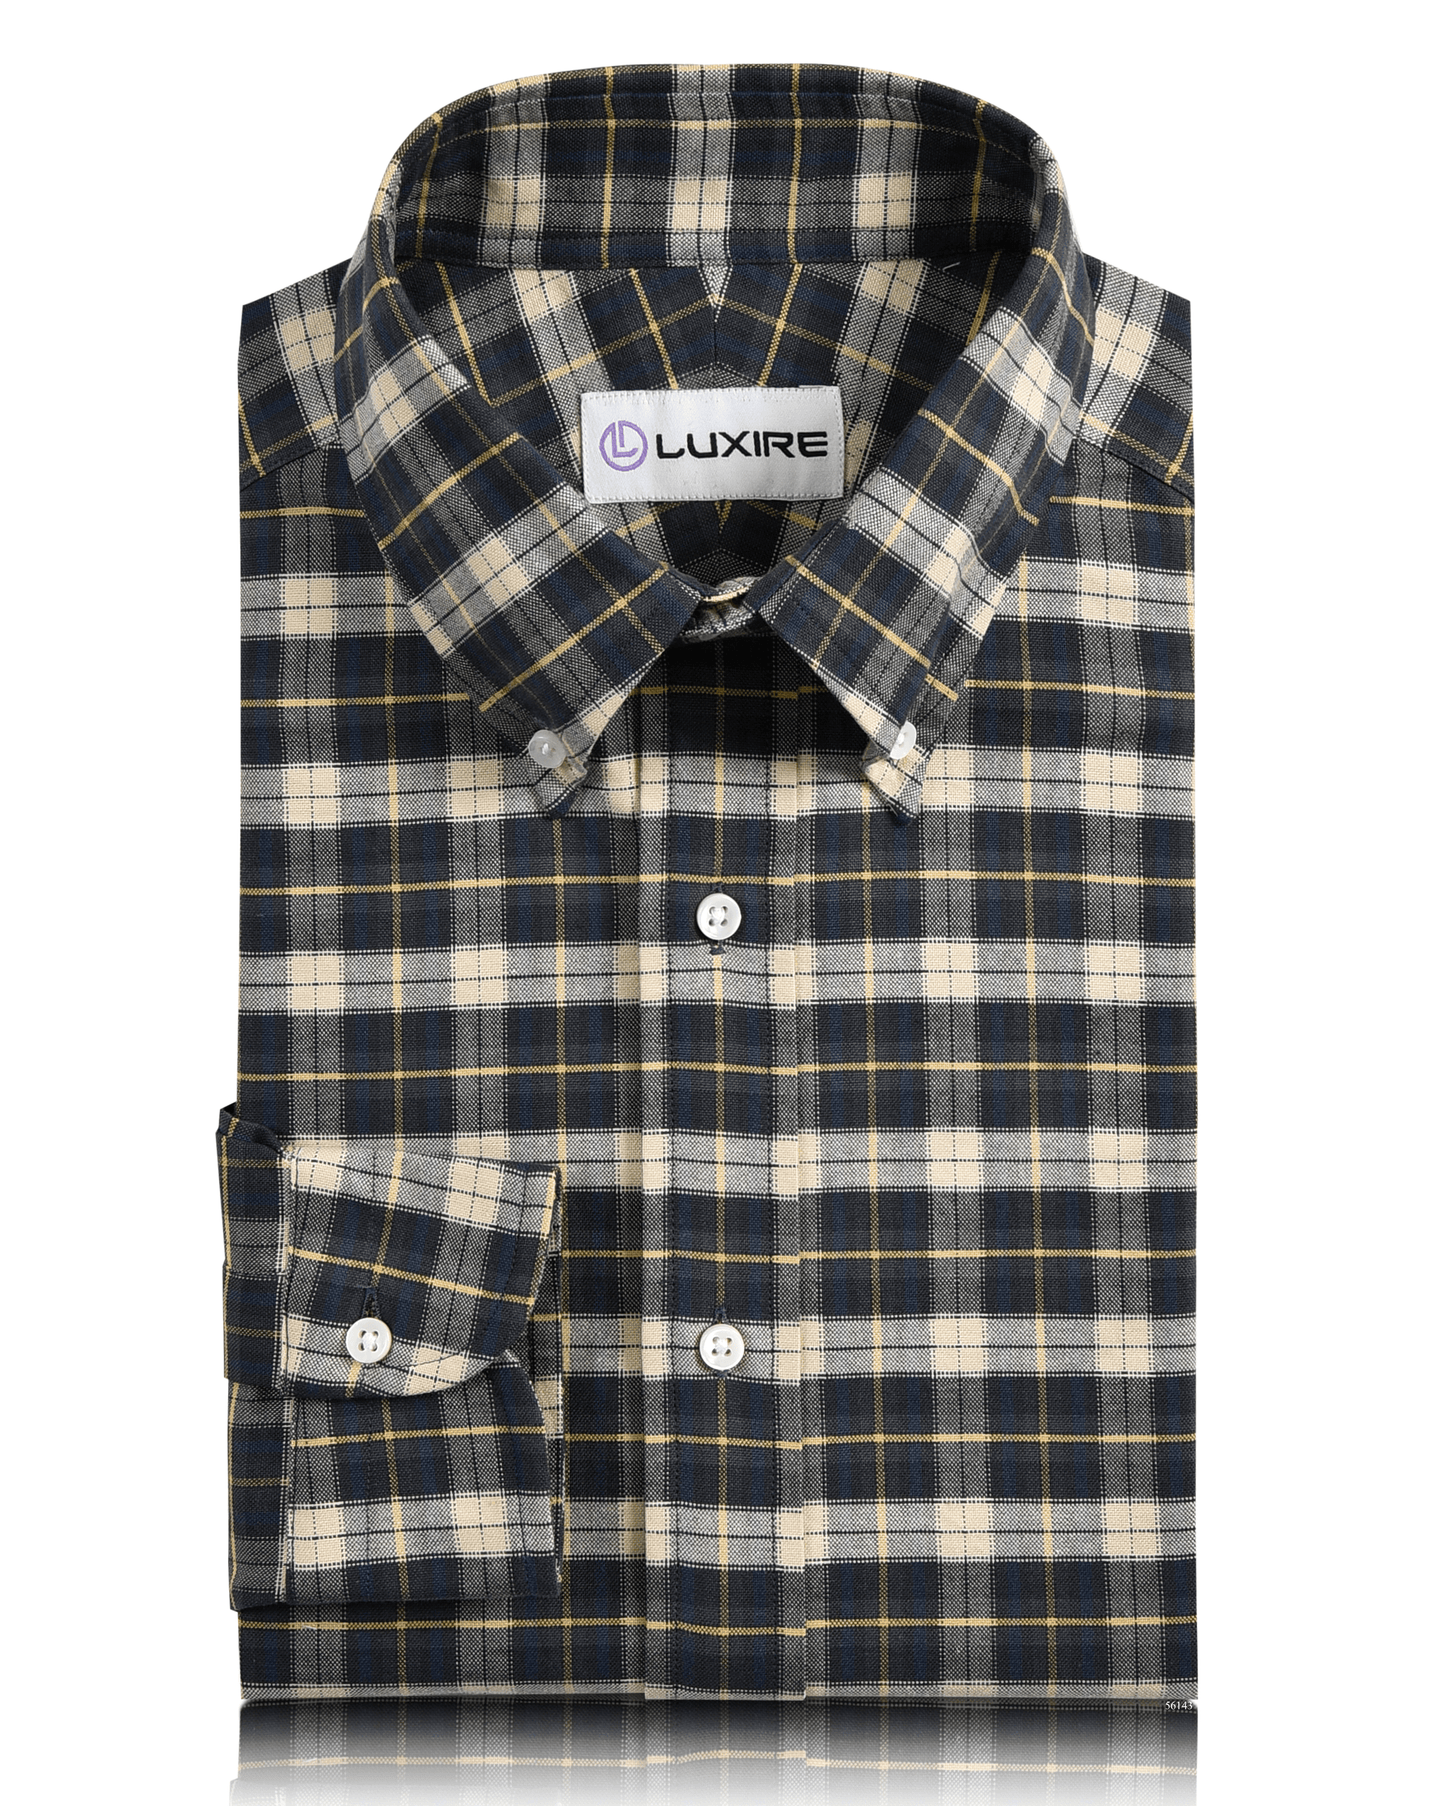 Front view of custom check shirts for men by Luxire green navy and cream